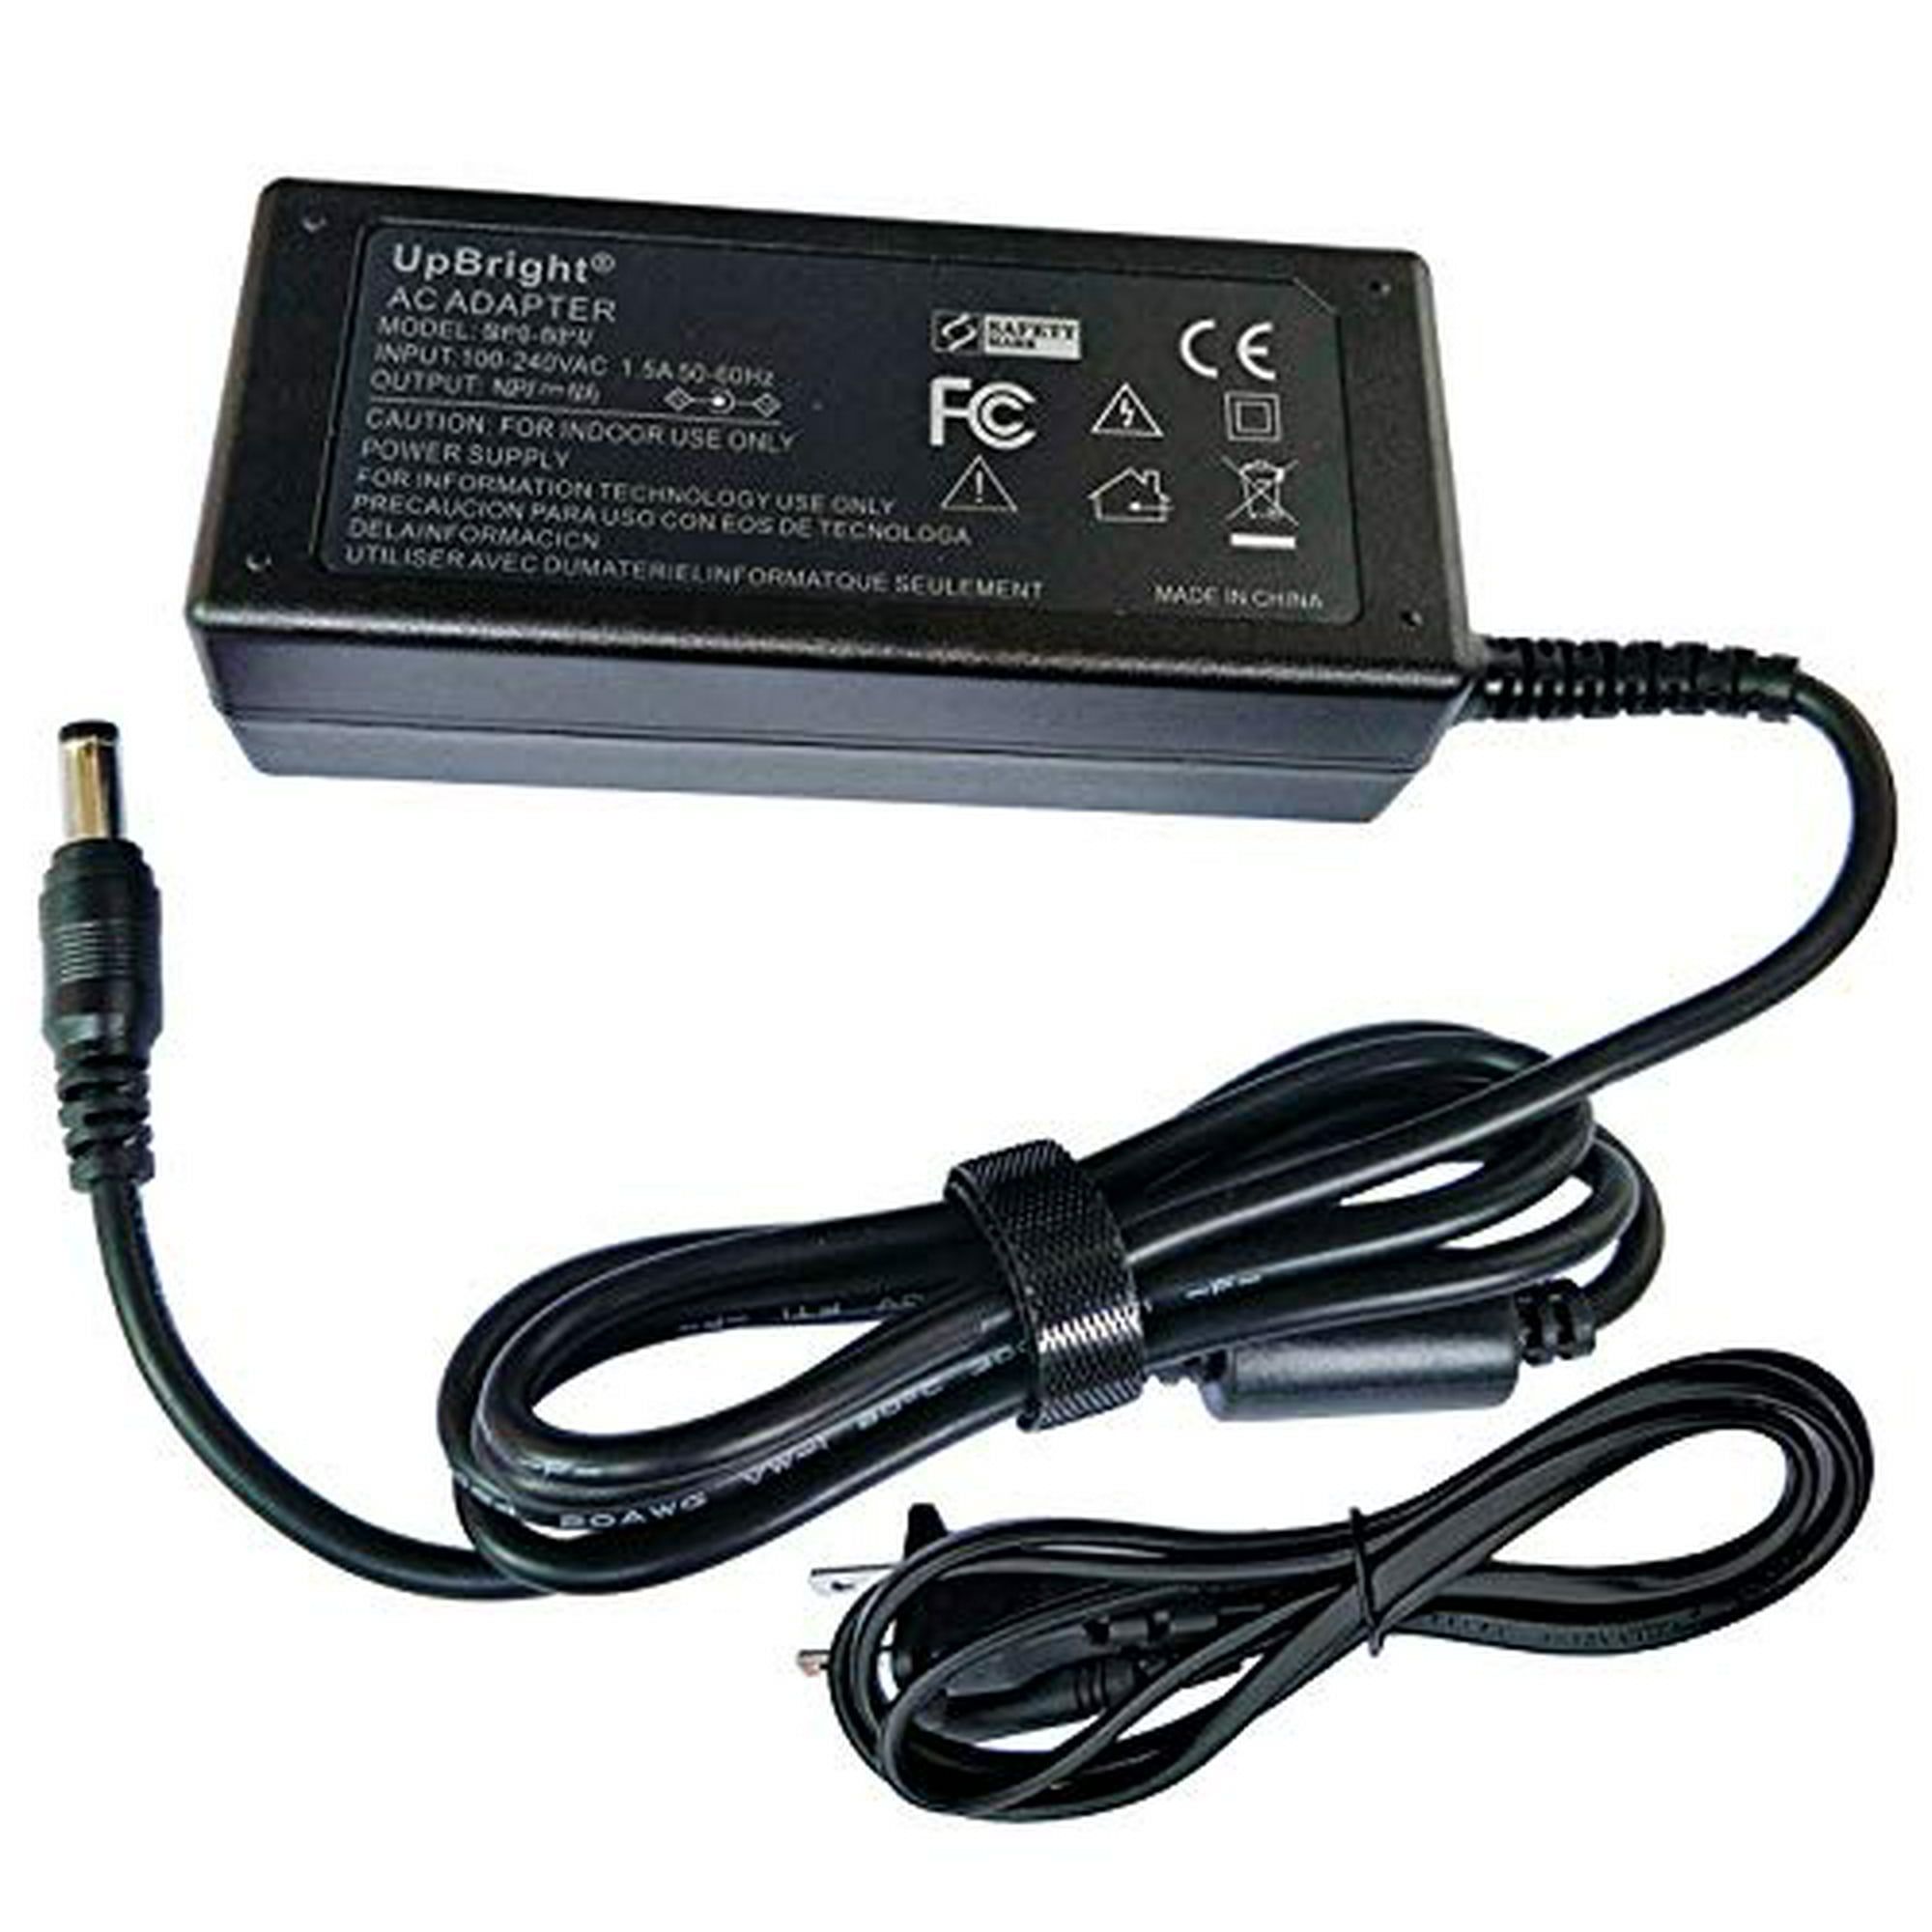 UpBright 24V 3A 72W AC/DC Adapter Compatible with Fujitsu ScanSnap